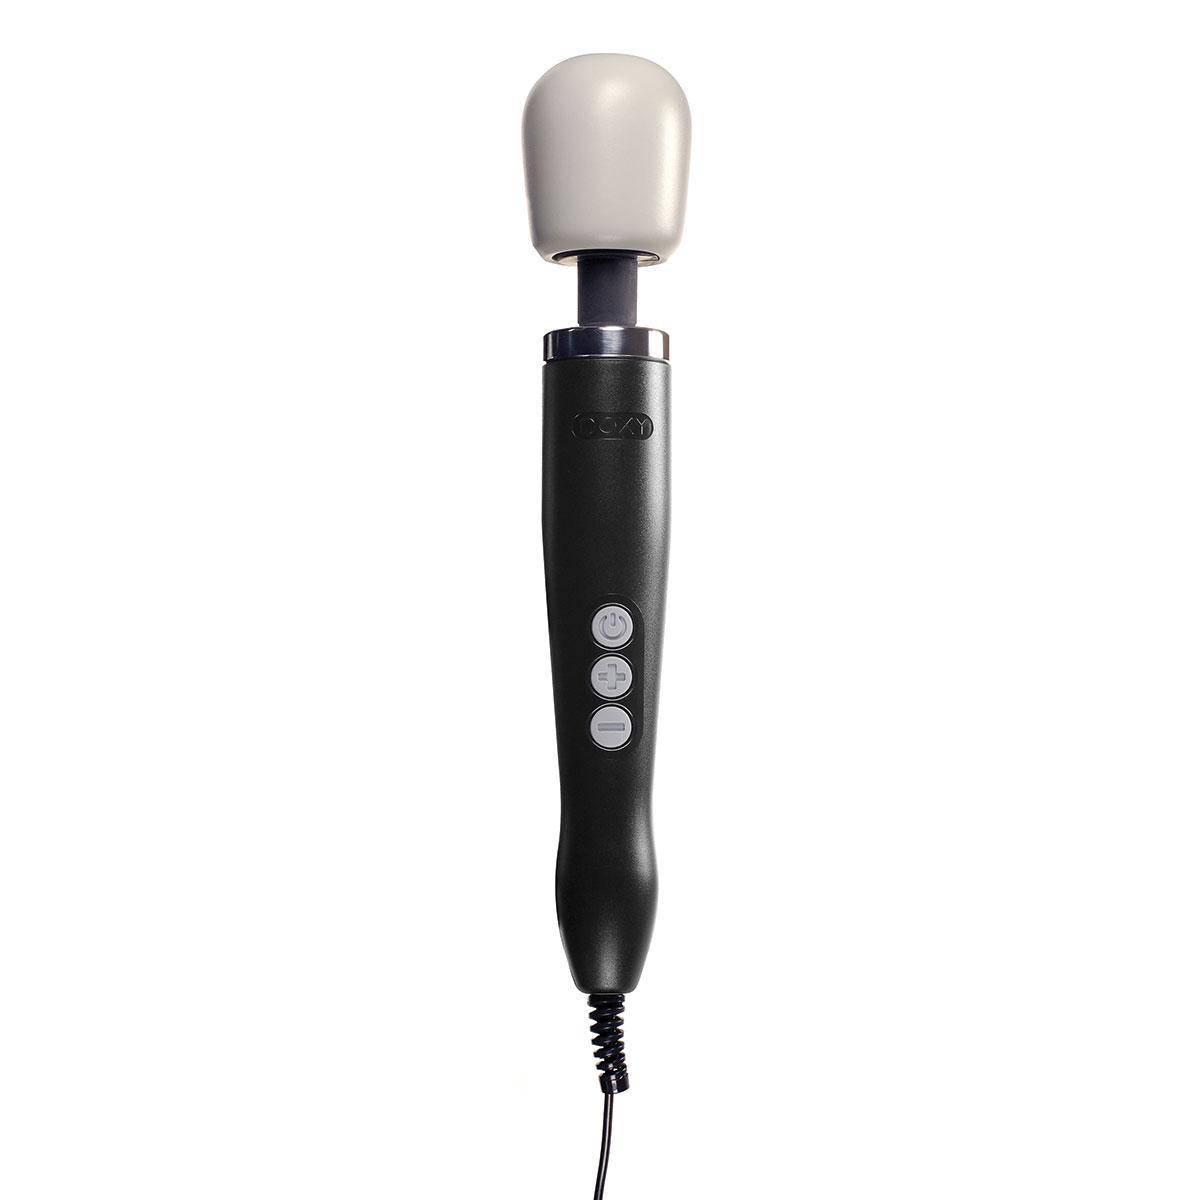 Doxy Wand Massager - Buy At Luxury Toy X - Free 3-Day Shipping